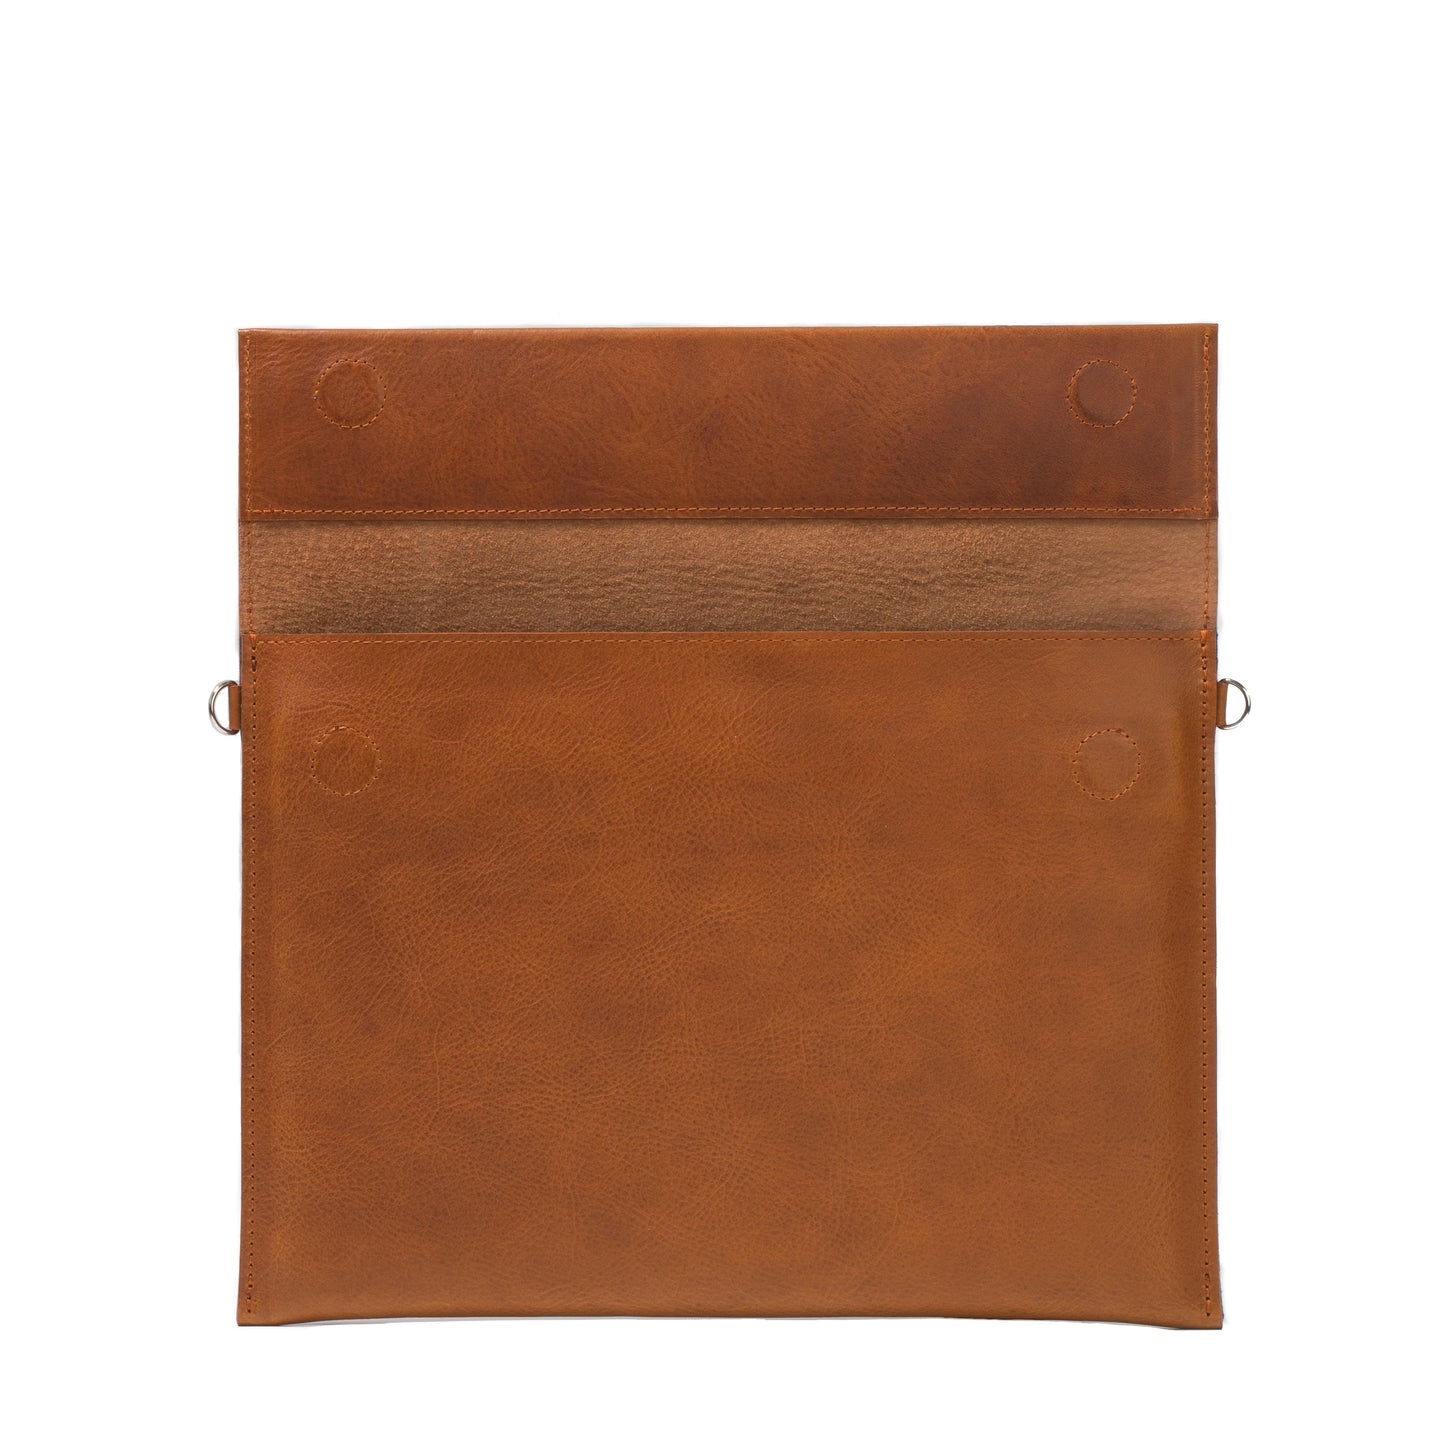 top rated mens sleeve case bag for iPad Pro in cognac brown tan color with adjustable strap made from premium Italian leather